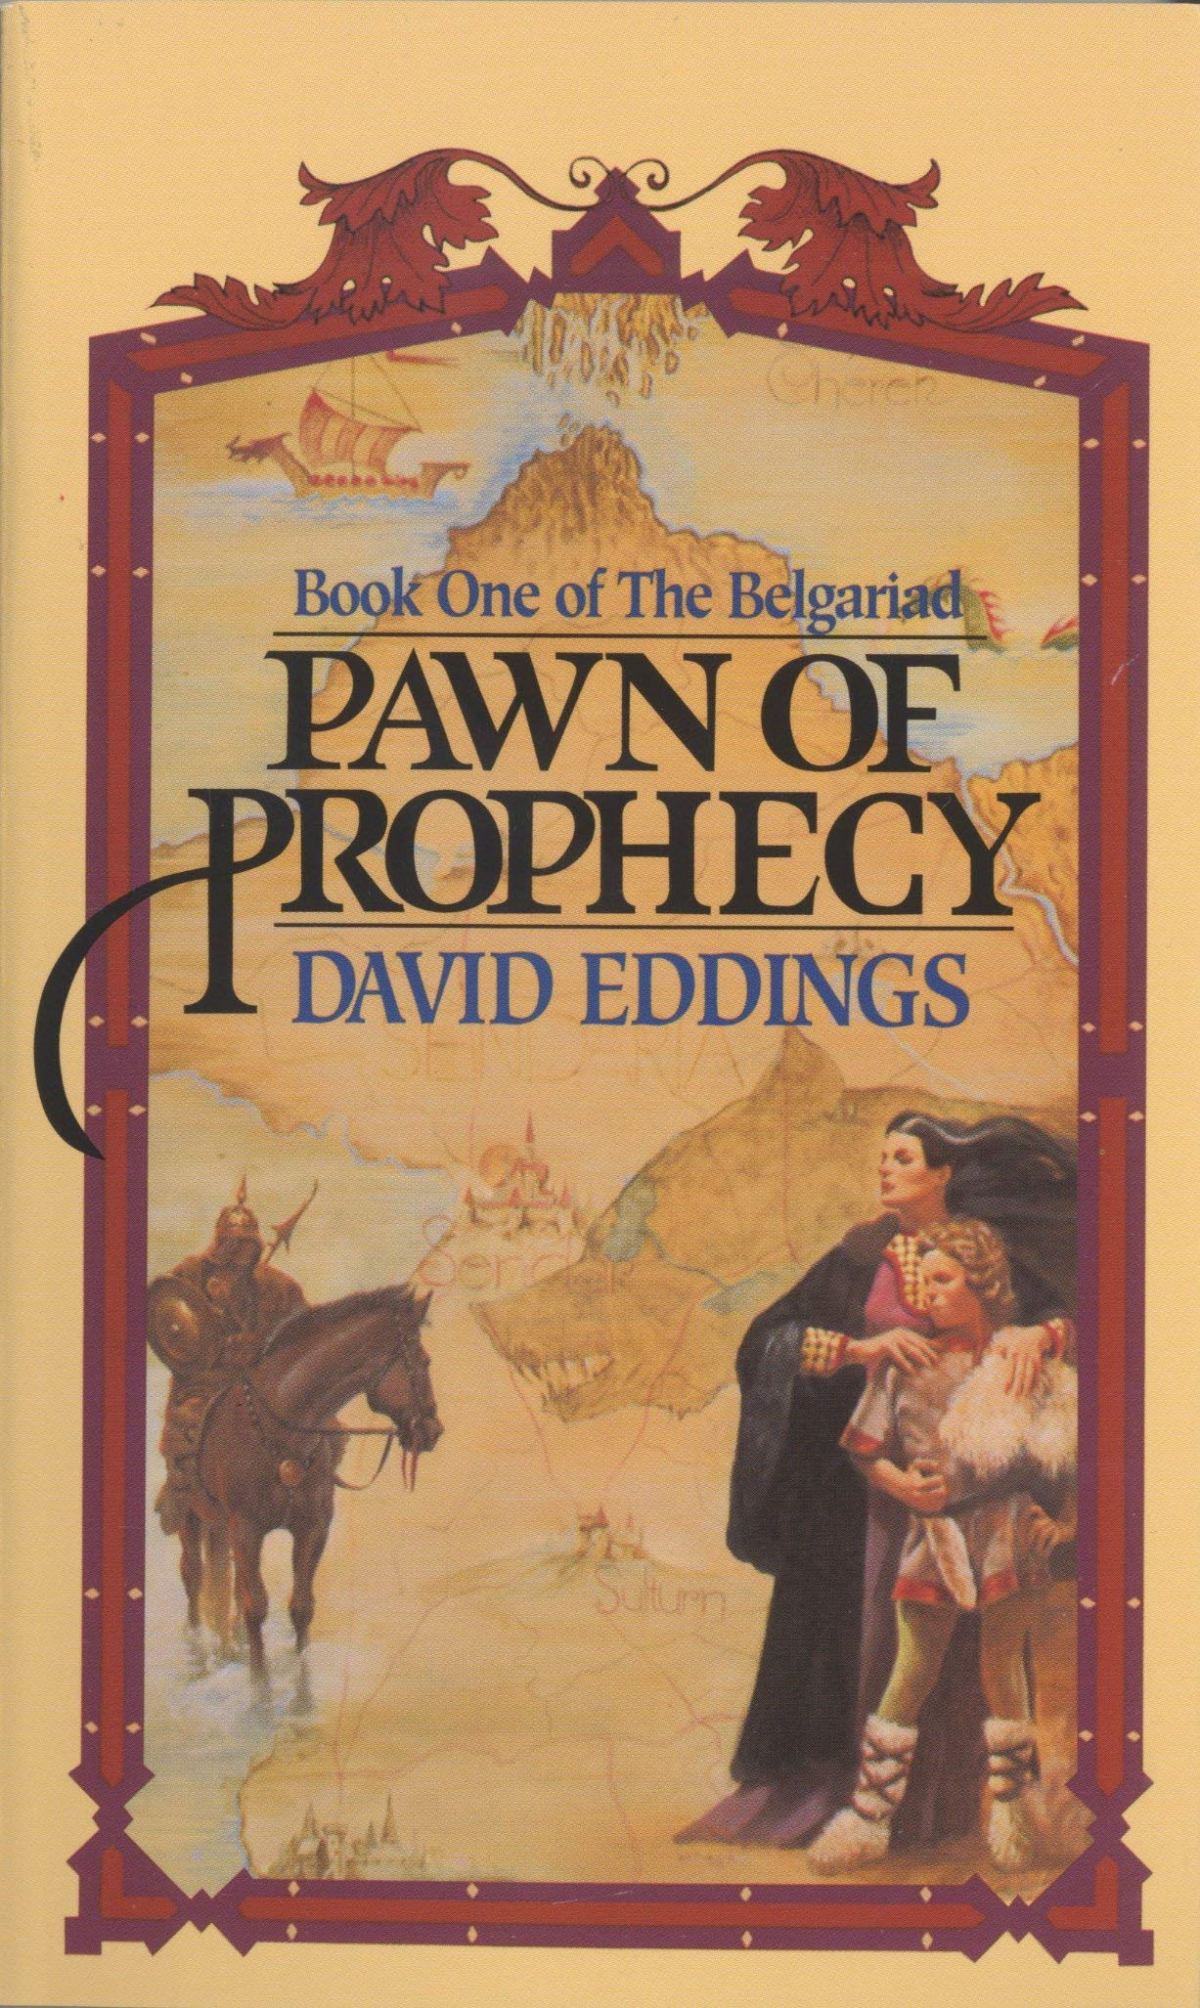 Pawn of Prophecy by David Eddings